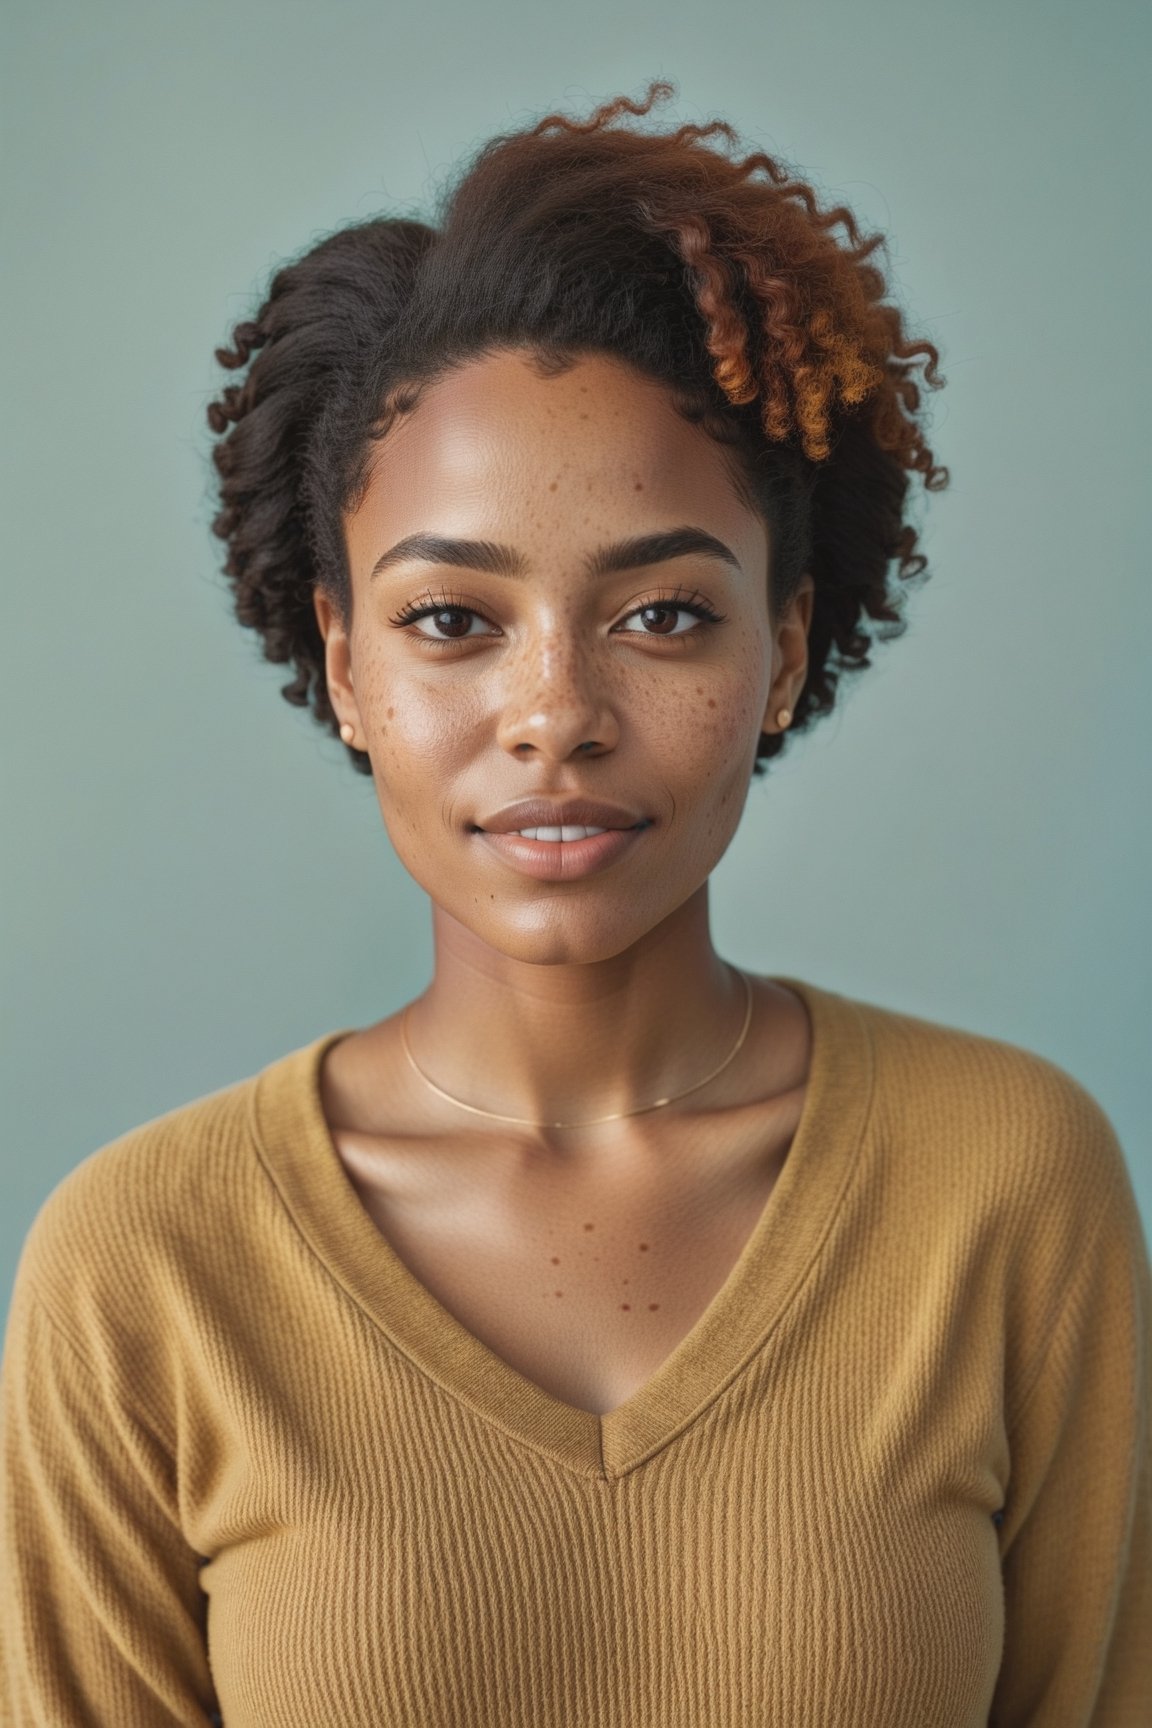 Black young woman with freckles, in the style of a stock photo, smart casual, diverse, relatable personality, cheerful muted color palette with texture, flickr, provia, minimal retouching, the helsinki school